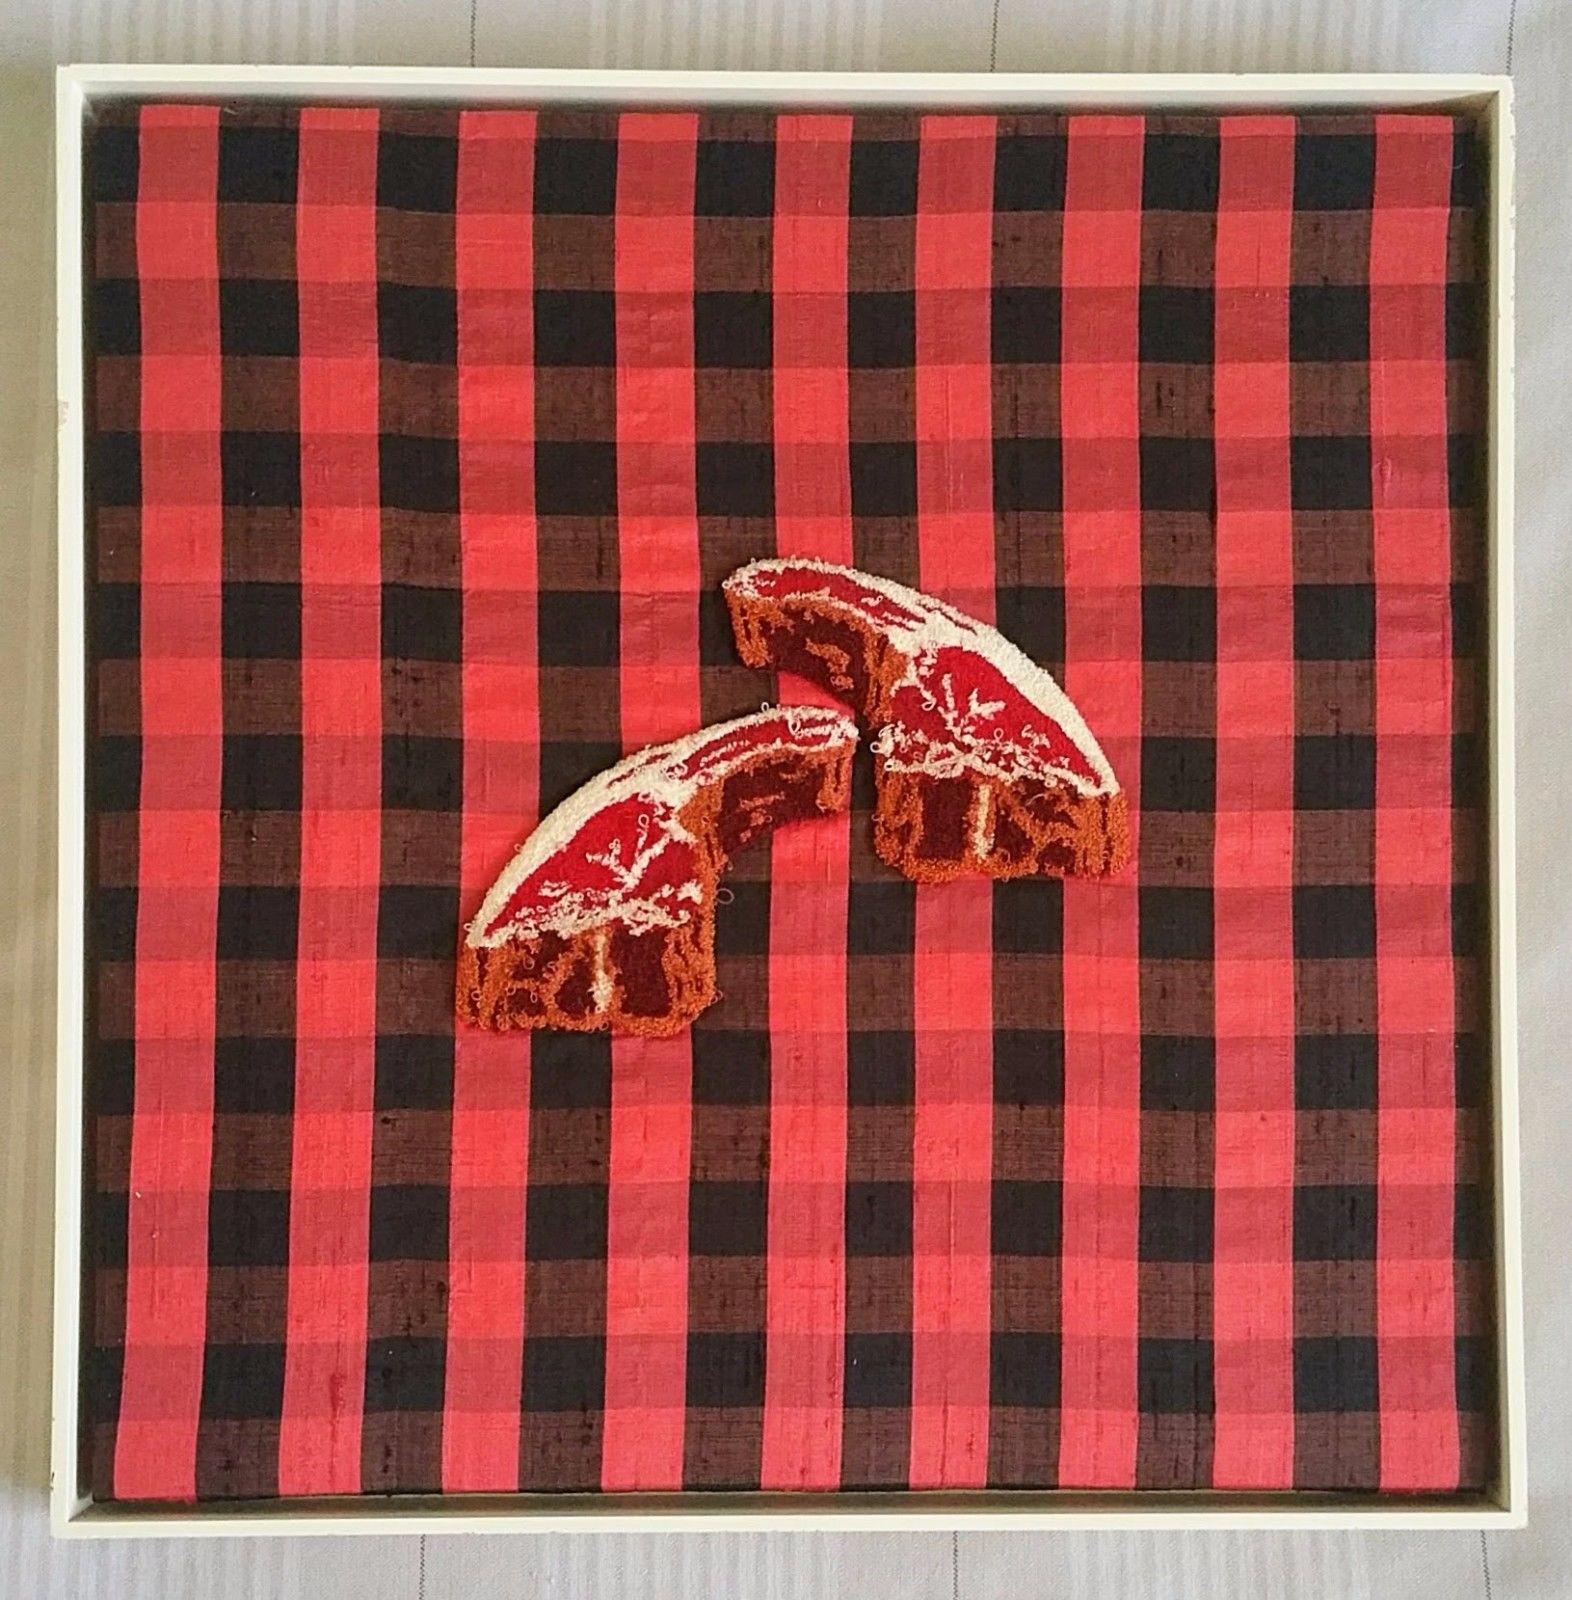 1995 ORIGINAL SIGNED GEORGE STOLL "LAMB CHOPS ON HUNTERS PLAID" FRAMED TAPESTRY